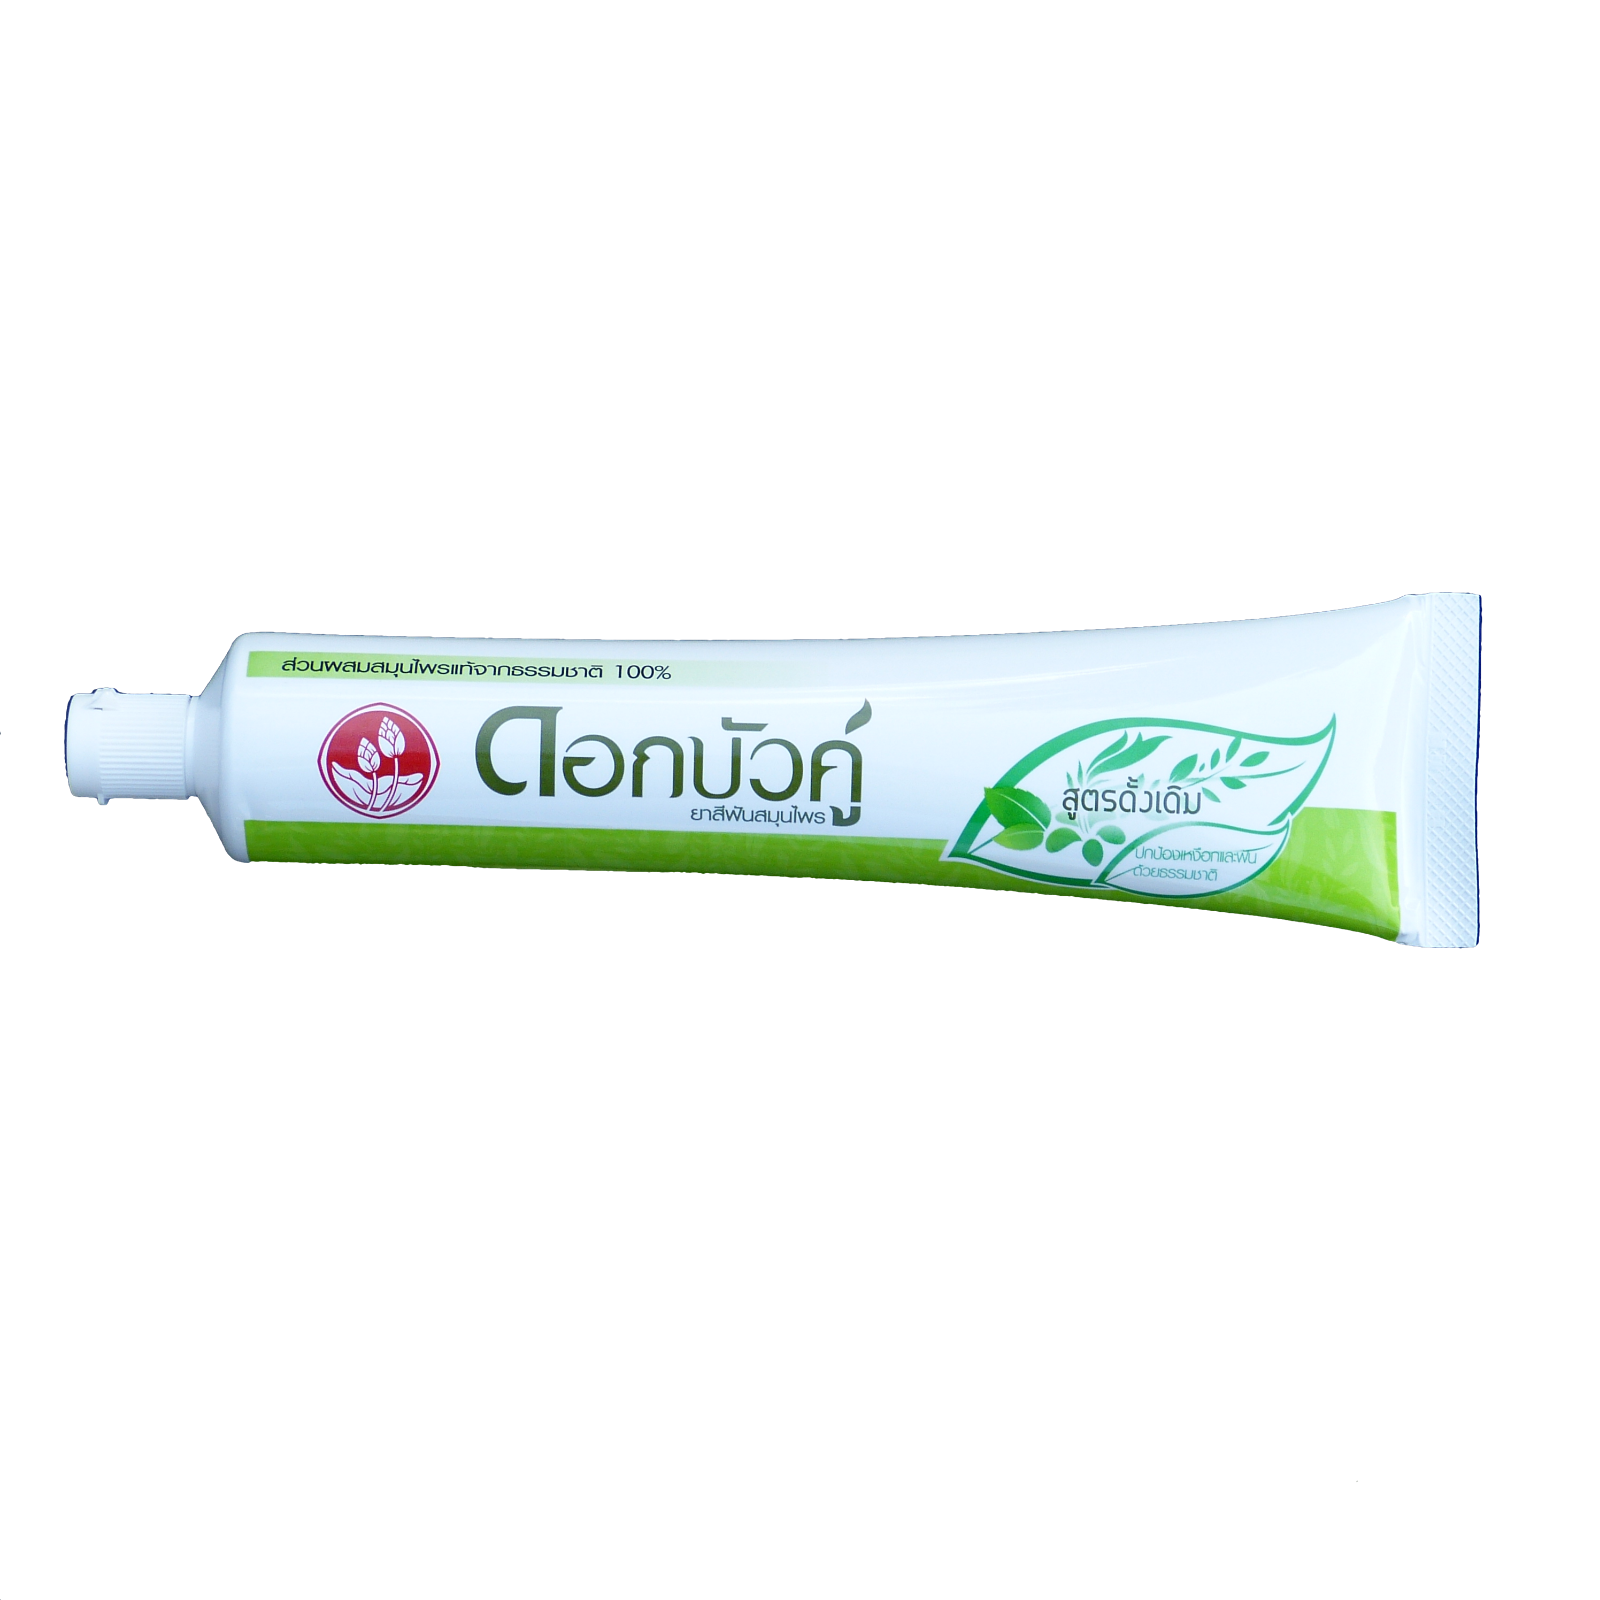 Twin Lotus Thai Herbal Natural Black Toothpaste 180g Pack of 2 - Asian Beauty Supply